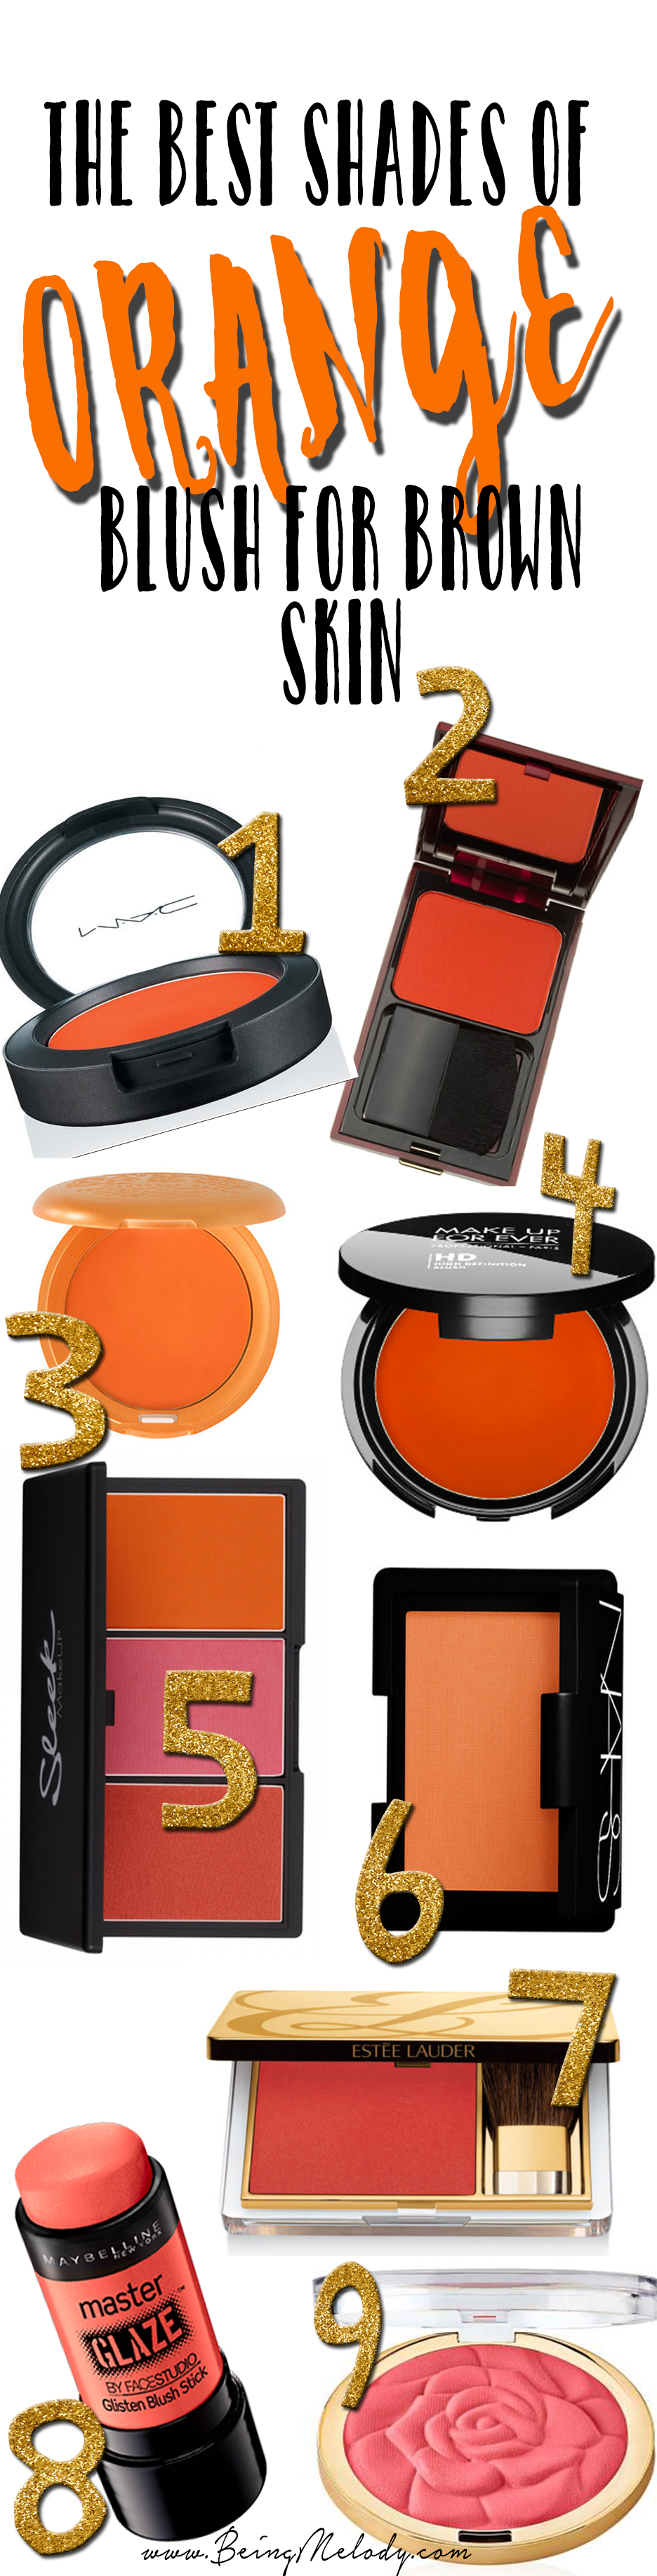 The Best Shades of Orange Blush for Brown Skin.